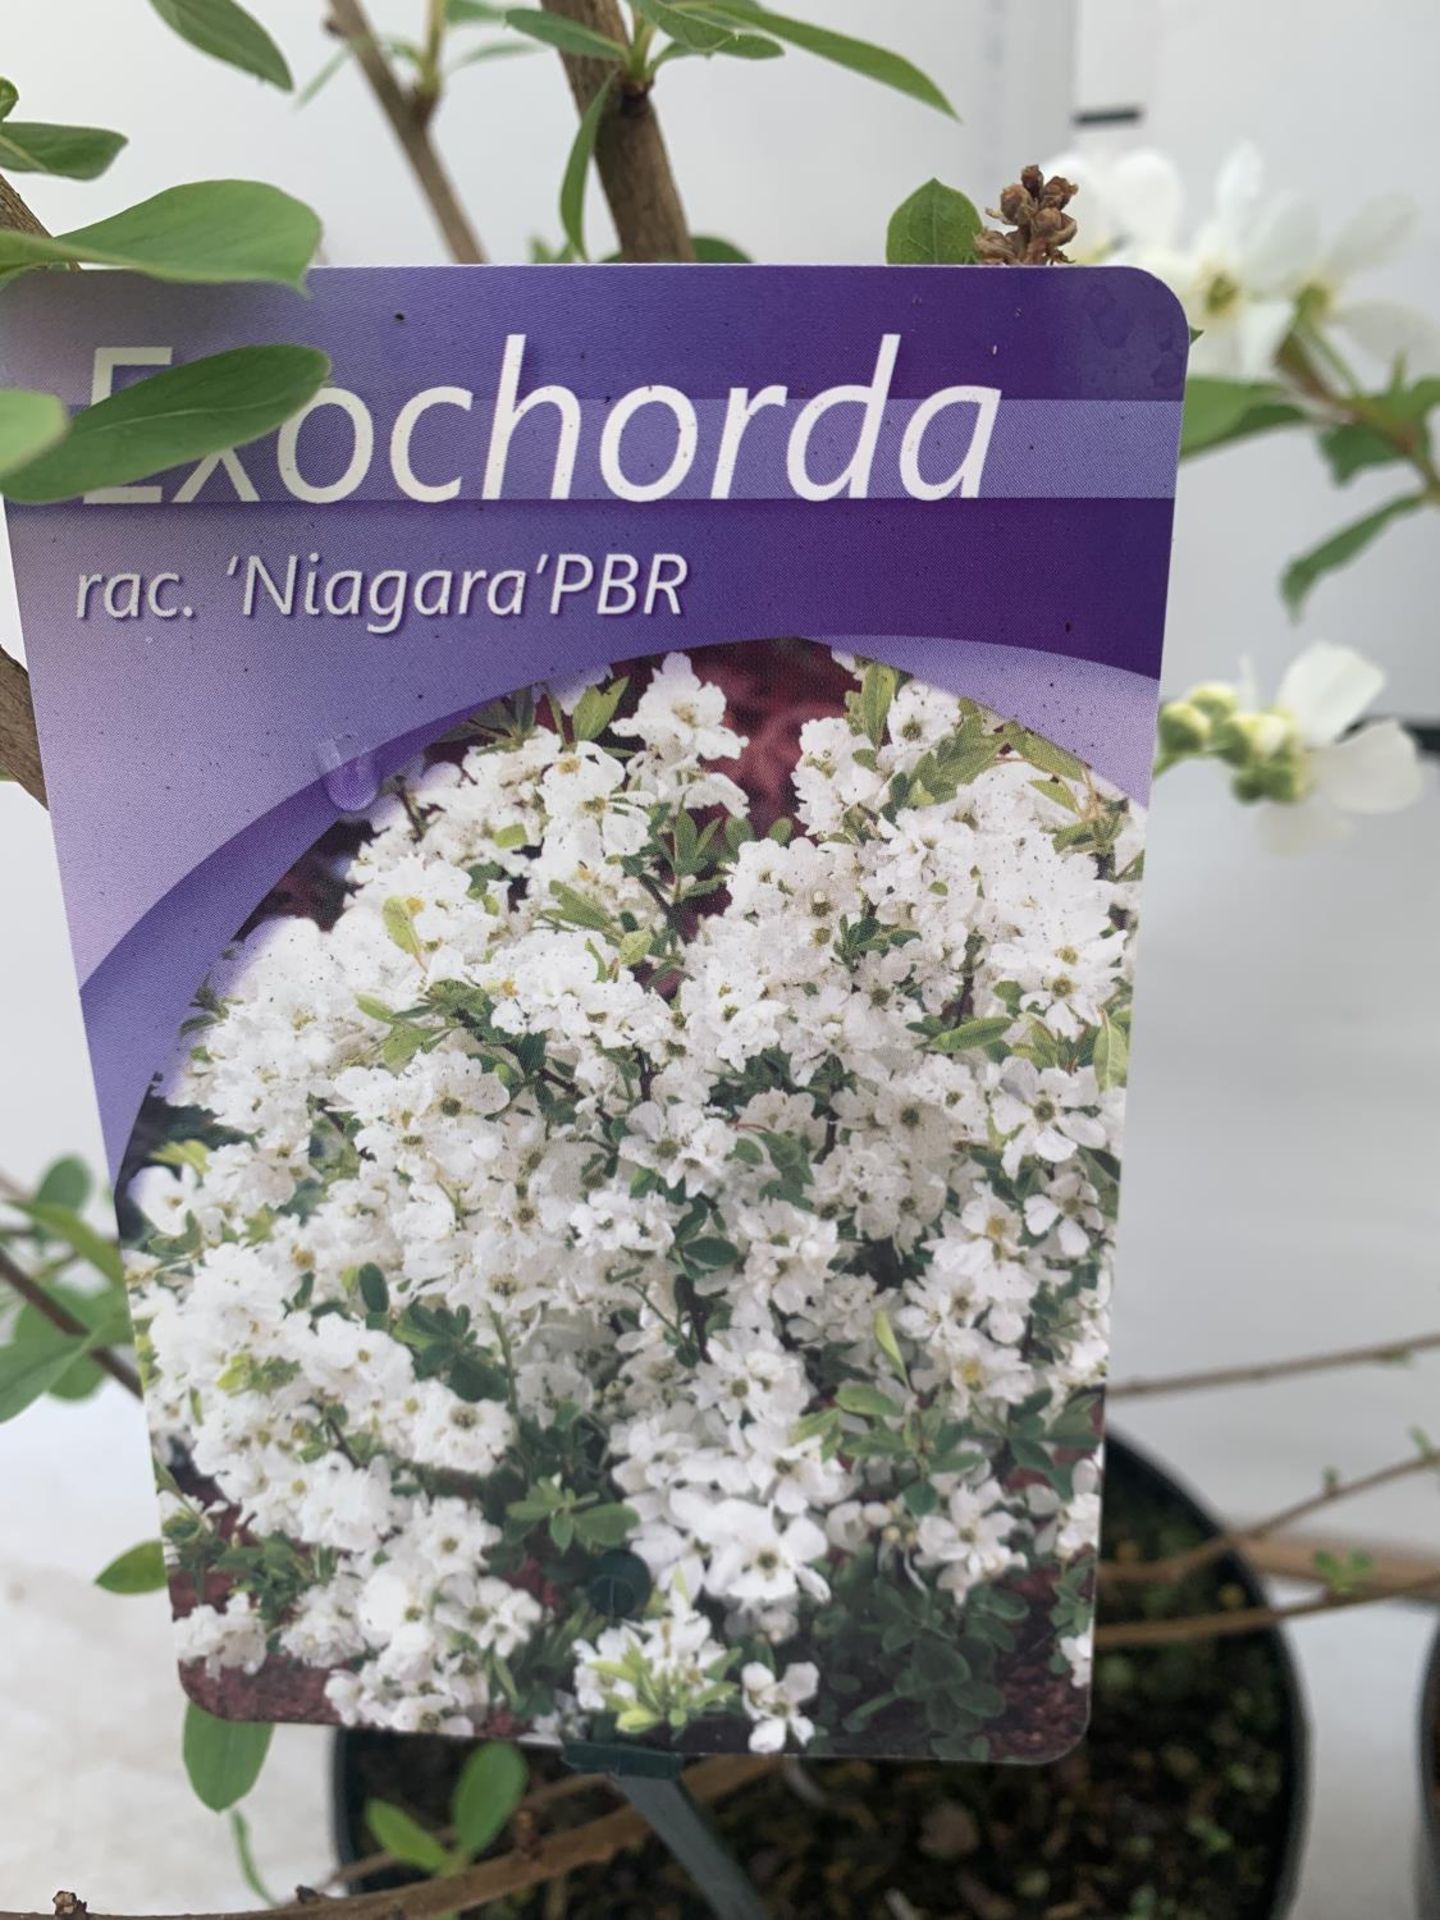 TWO EXOCHORDA 'NIAGARA' AND 'BLUSHING PEARL' APPROX 60CM IN HEIGHT IN 2 LTR POTS PLUS VAT TO BE SOLD - Bild 6 aus 6